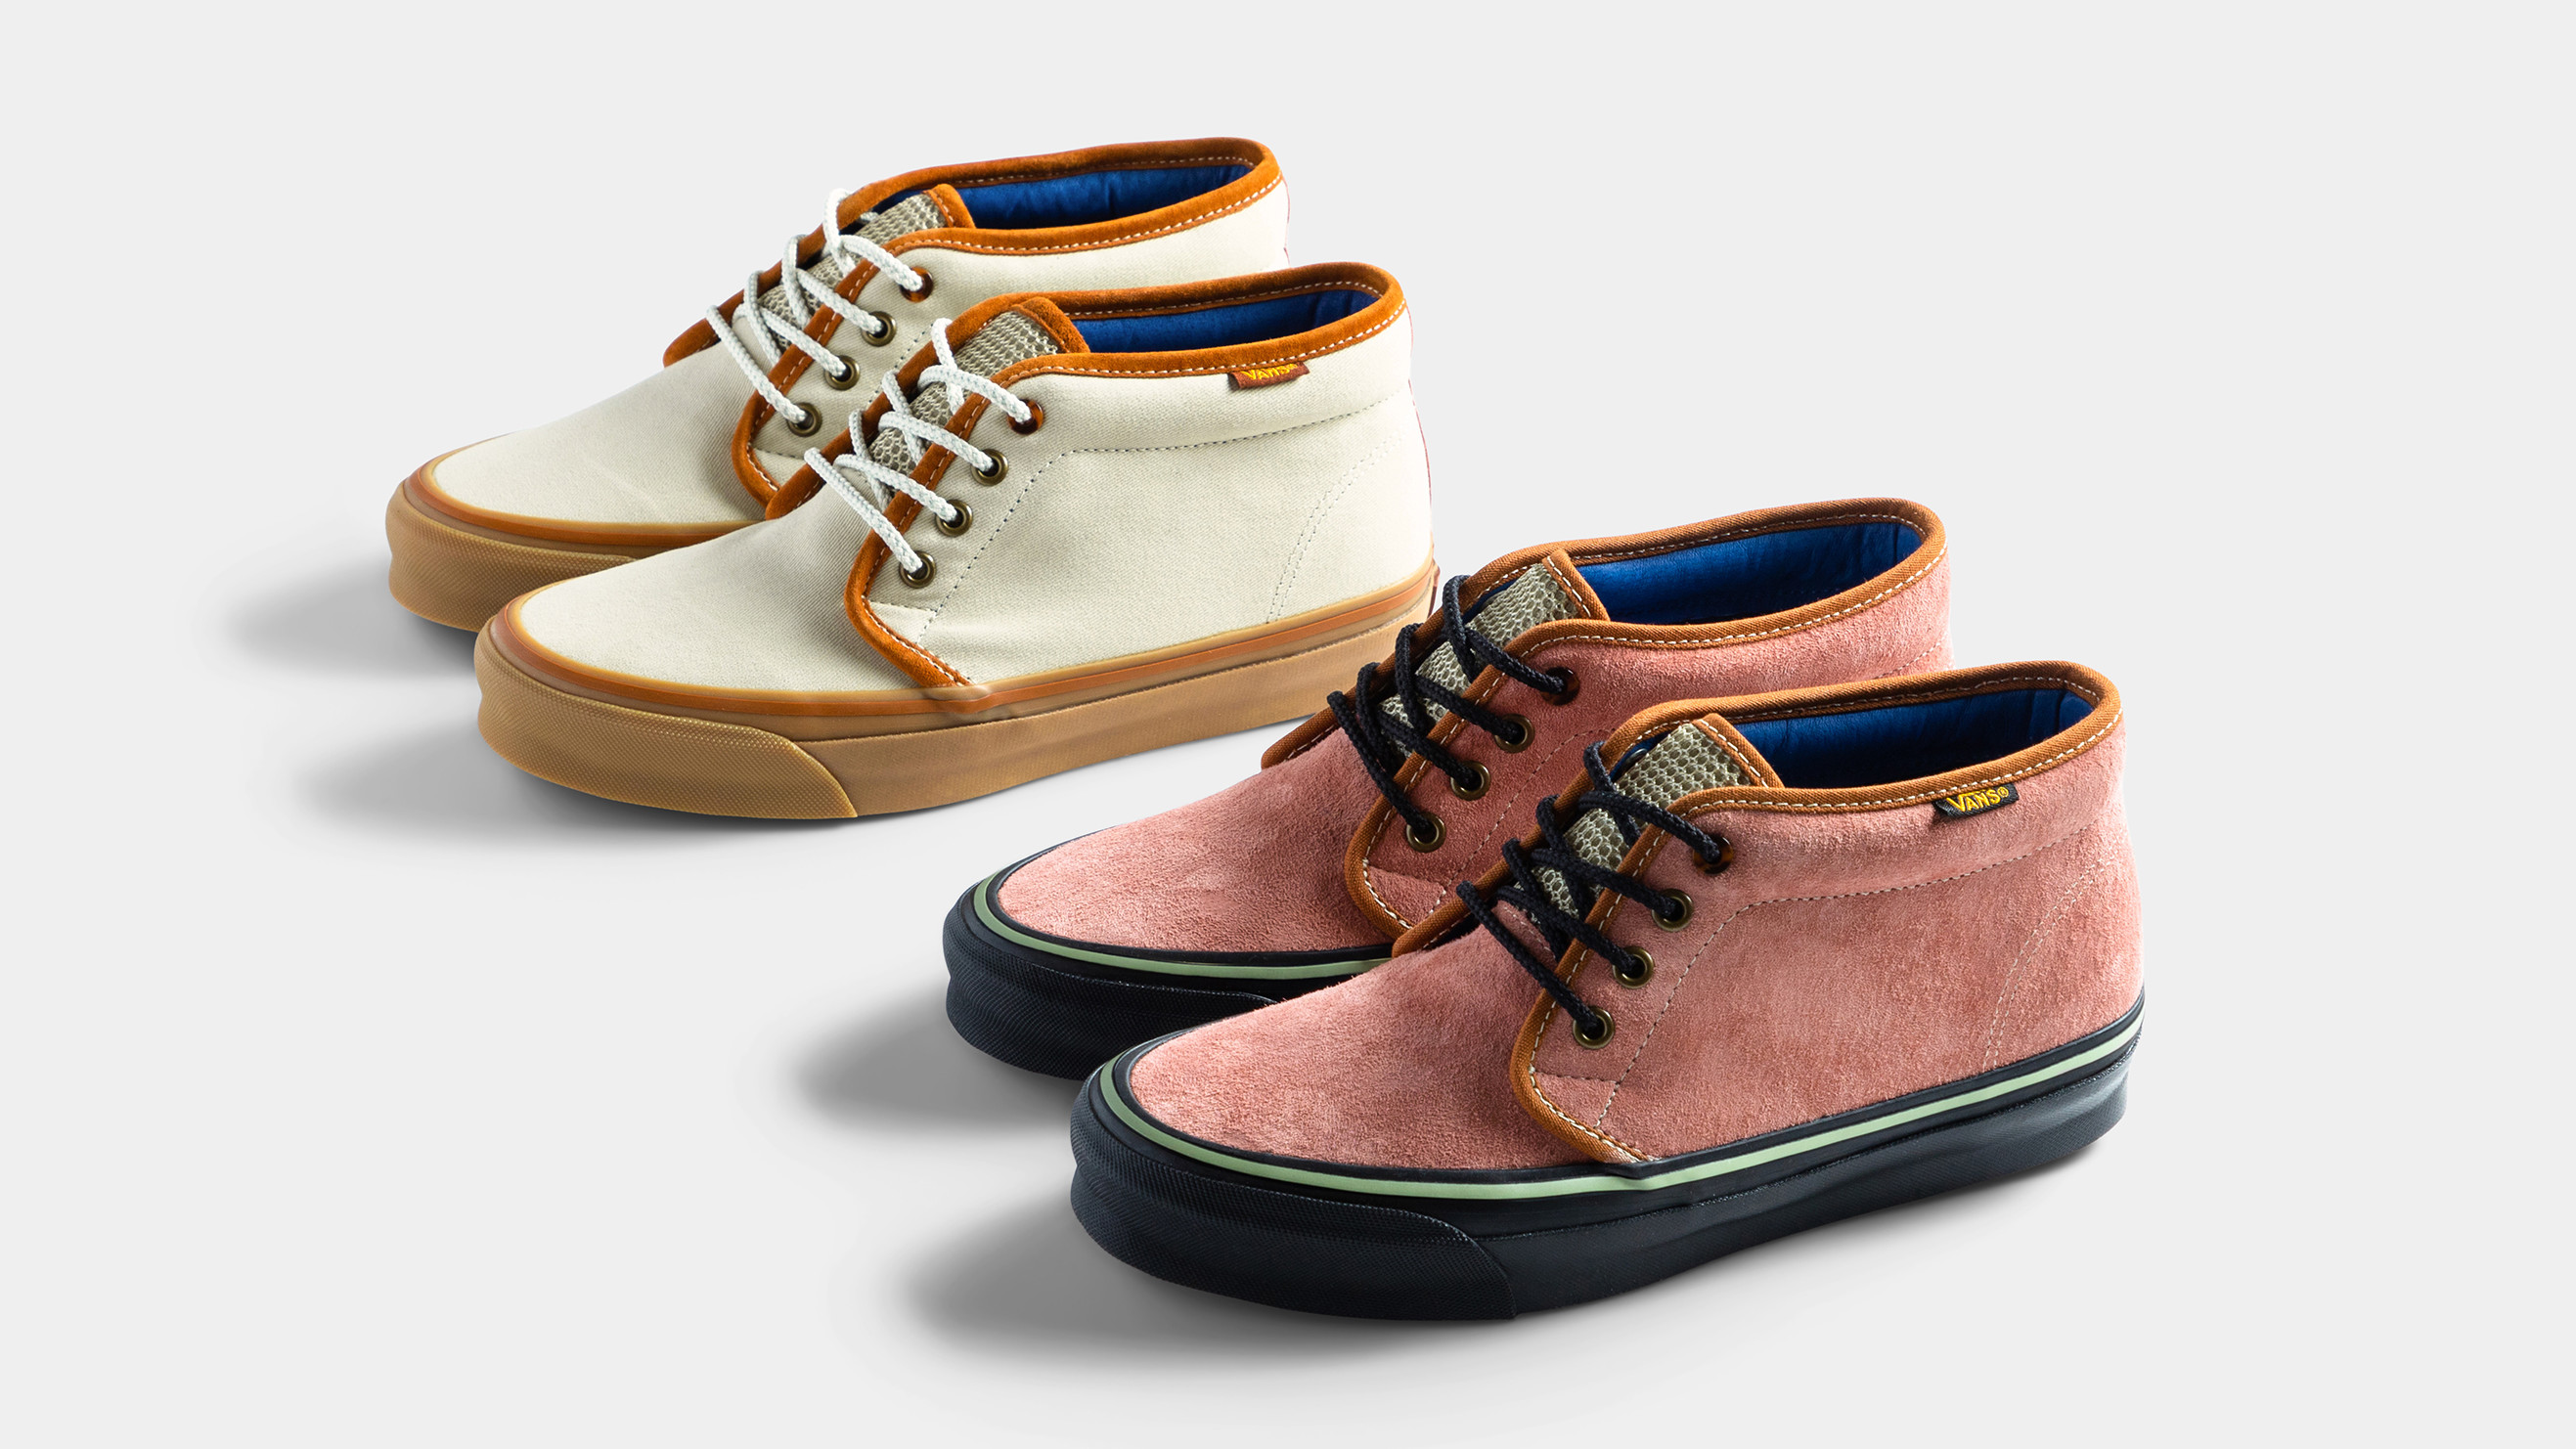 Bodega Vault by Vans Chukka 'Mid-Top Modern' Release Date April | Sole Collector